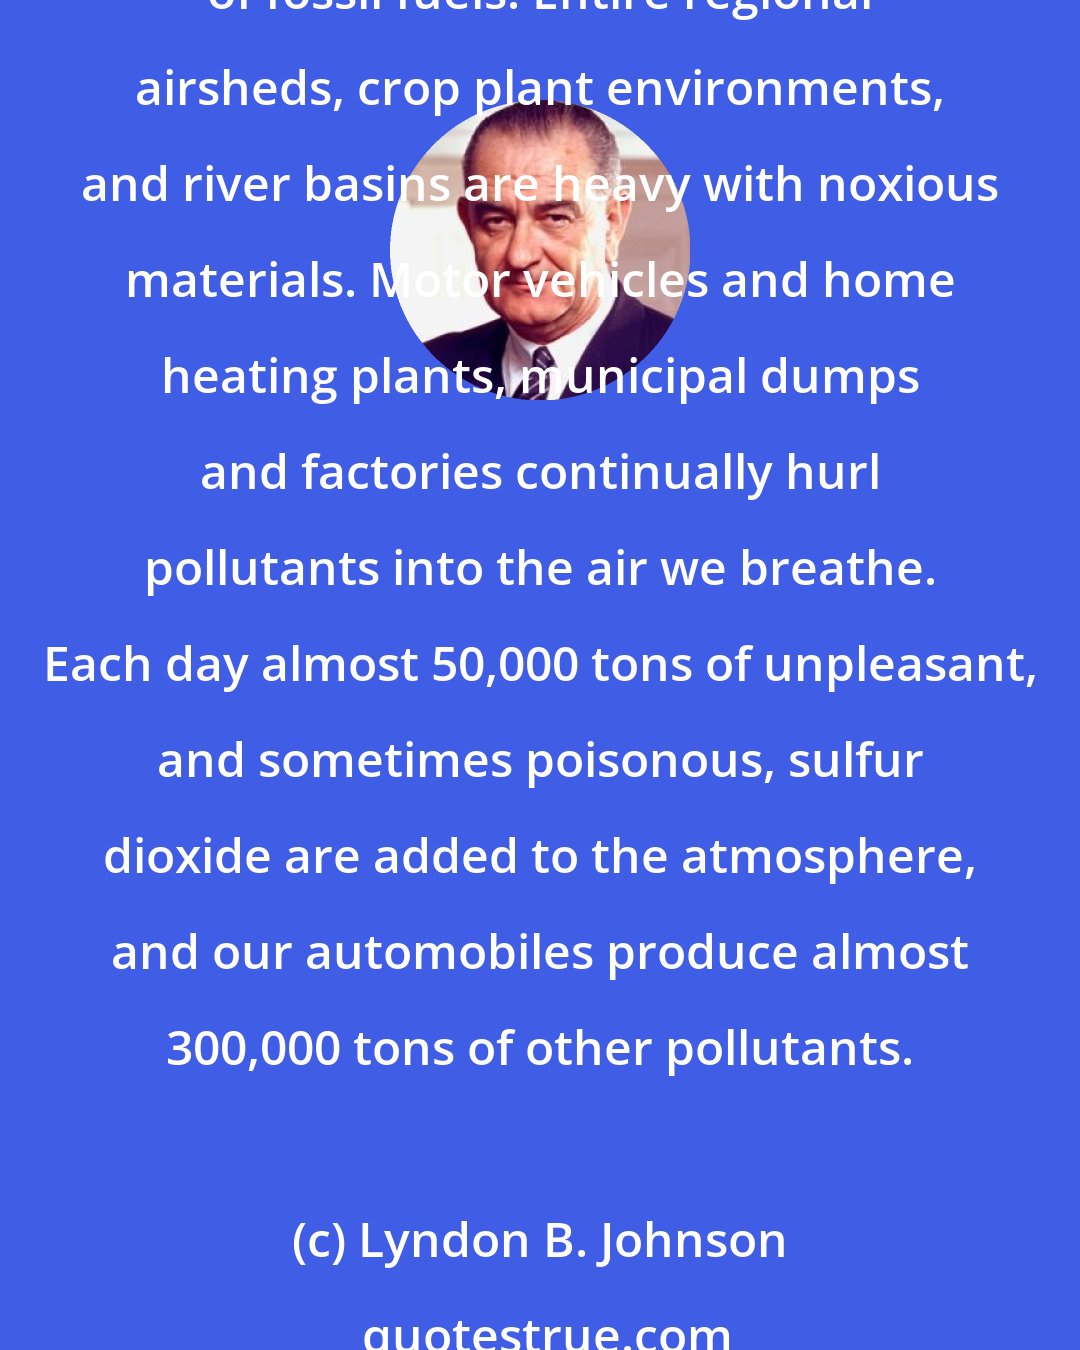 Lyndon B. Johnson: This generation has altered the composition of the atmosphere on a global scale through radioactive materials and a steady increase in carbon dioxide from the burning of fossil fuels. Entire regional airsheds, crop plant environments, and river basins are heavy with noxious materials. Motor vehicles and home heating plants, municipal dumps and factories continually hurl pollutants into the air we breathe. Each day almost 50,000 tons of unpleasant, and sometimes poisonous, sulfur dioxide are added to the atmosphere, and our automobiles produce almost 300,000 tons of other pollutants.